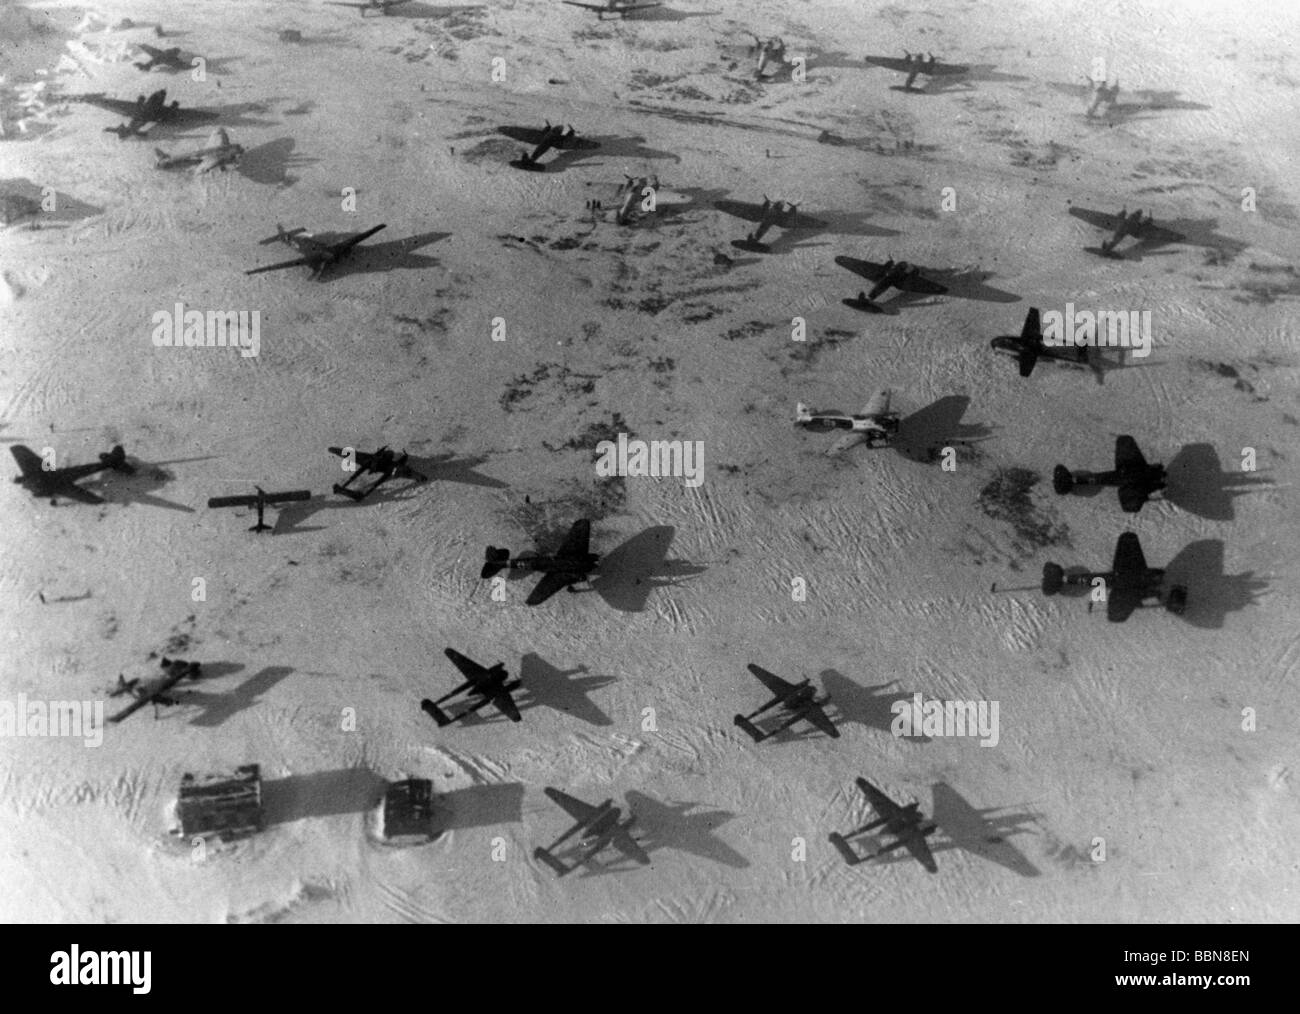 events, Second World War / WWII, Russia, aerial warfare, german planes on an airfield in Zaporizhia, Ukraine, 11.2.1943, Stock Photo